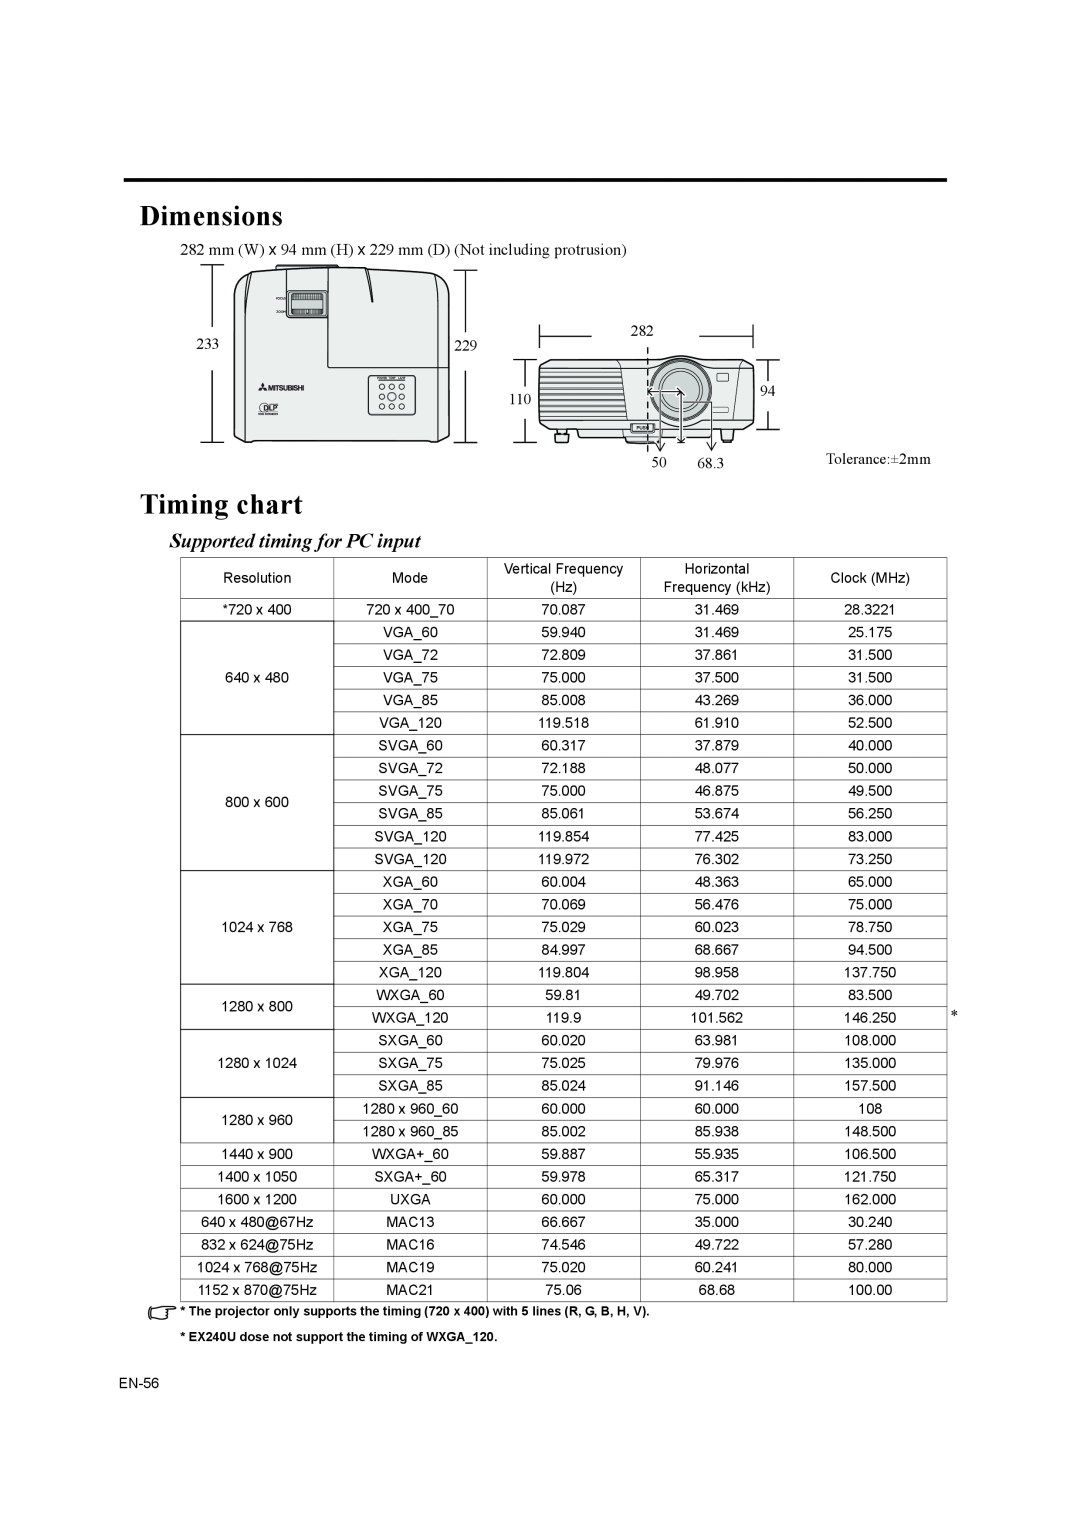 Mitsubishi Electronics EW270U user manual Dimensions, Timing chart, Supported timing for PC input 